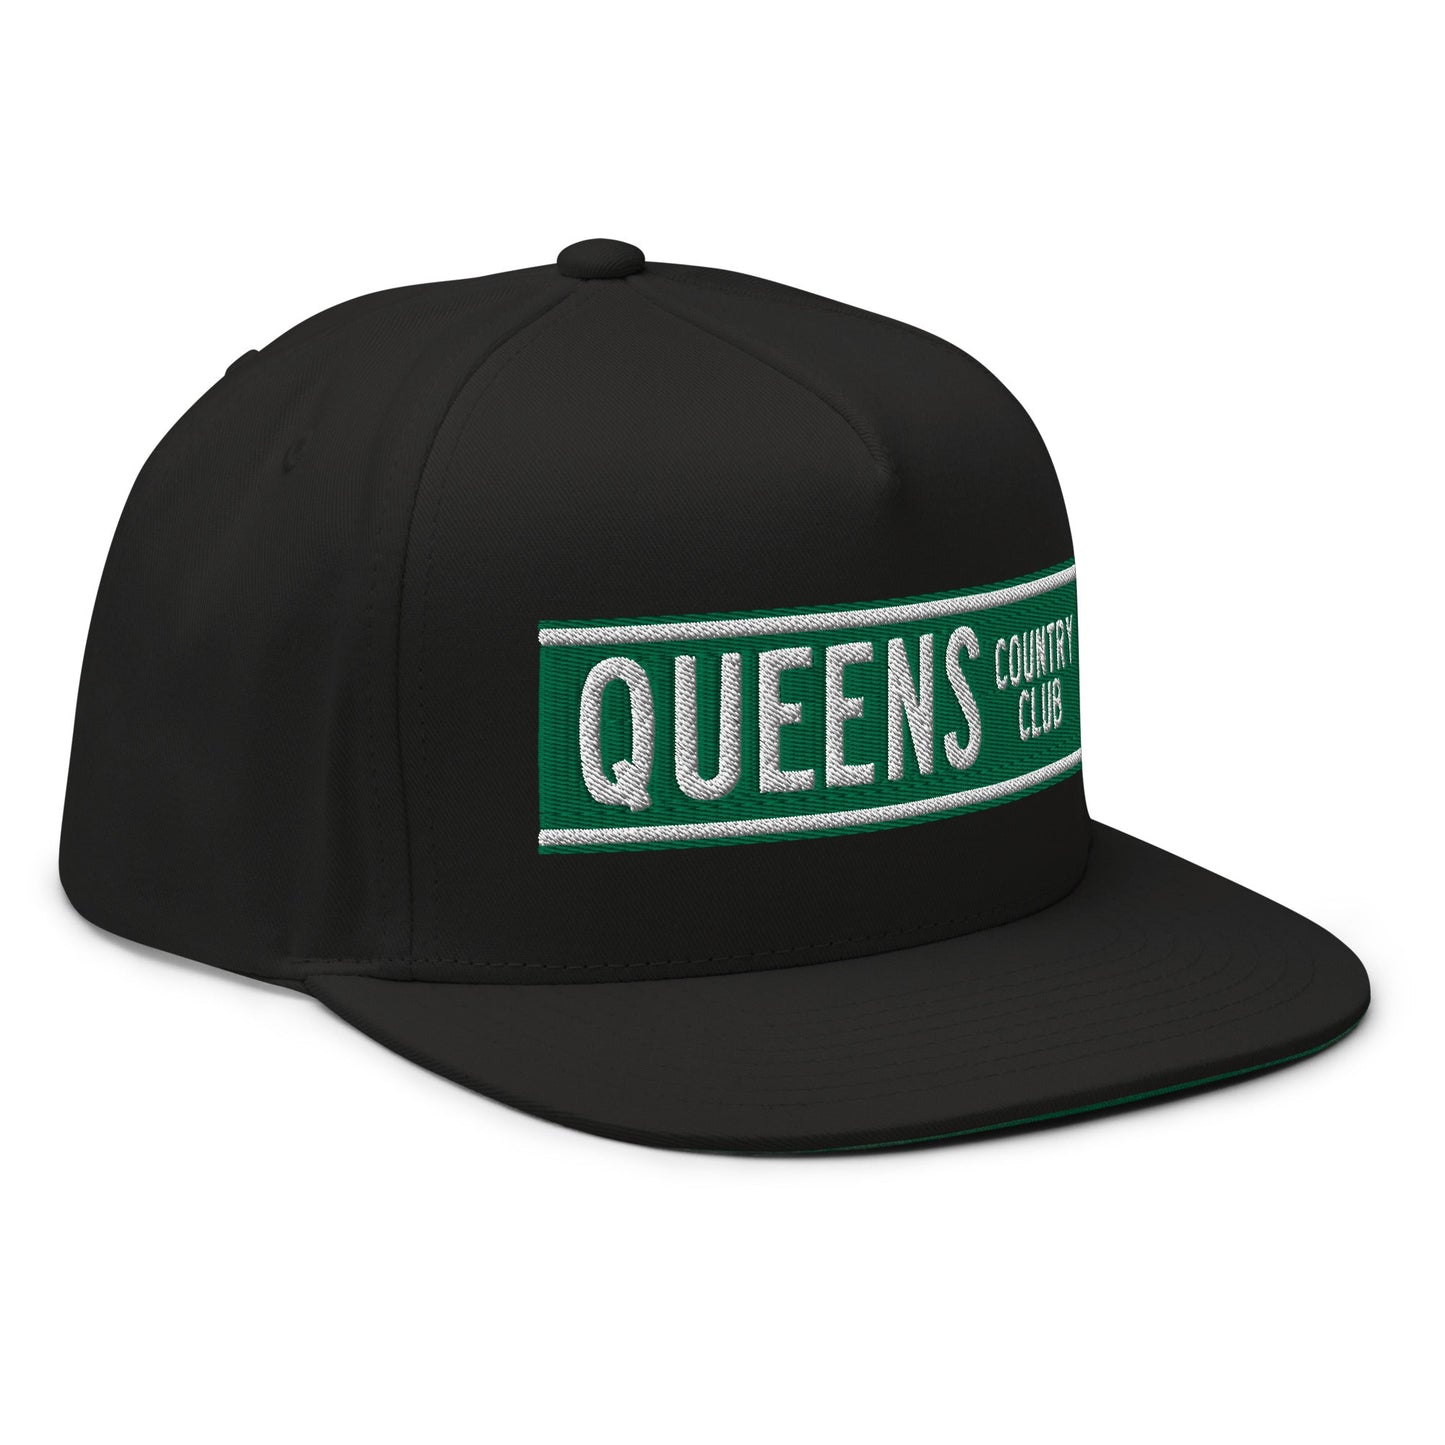 Queens CC Street Sign Flat Bill Cap by Queens Country Club